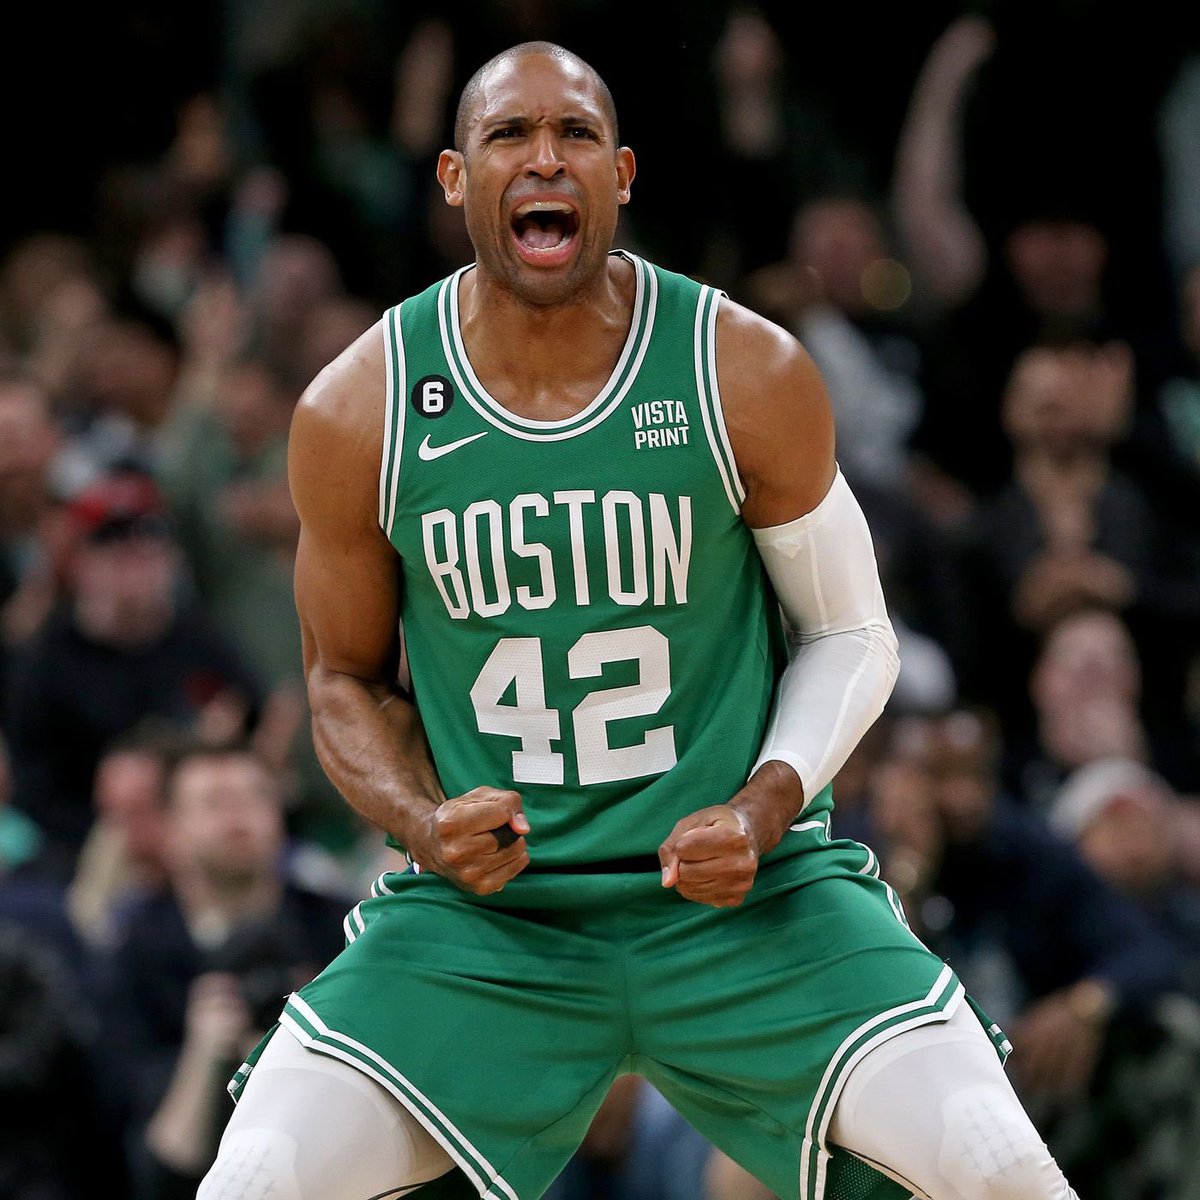 Al Horford won us this game. He got the crowd into the game, played amazing defensively, and hit his shots. The OG.